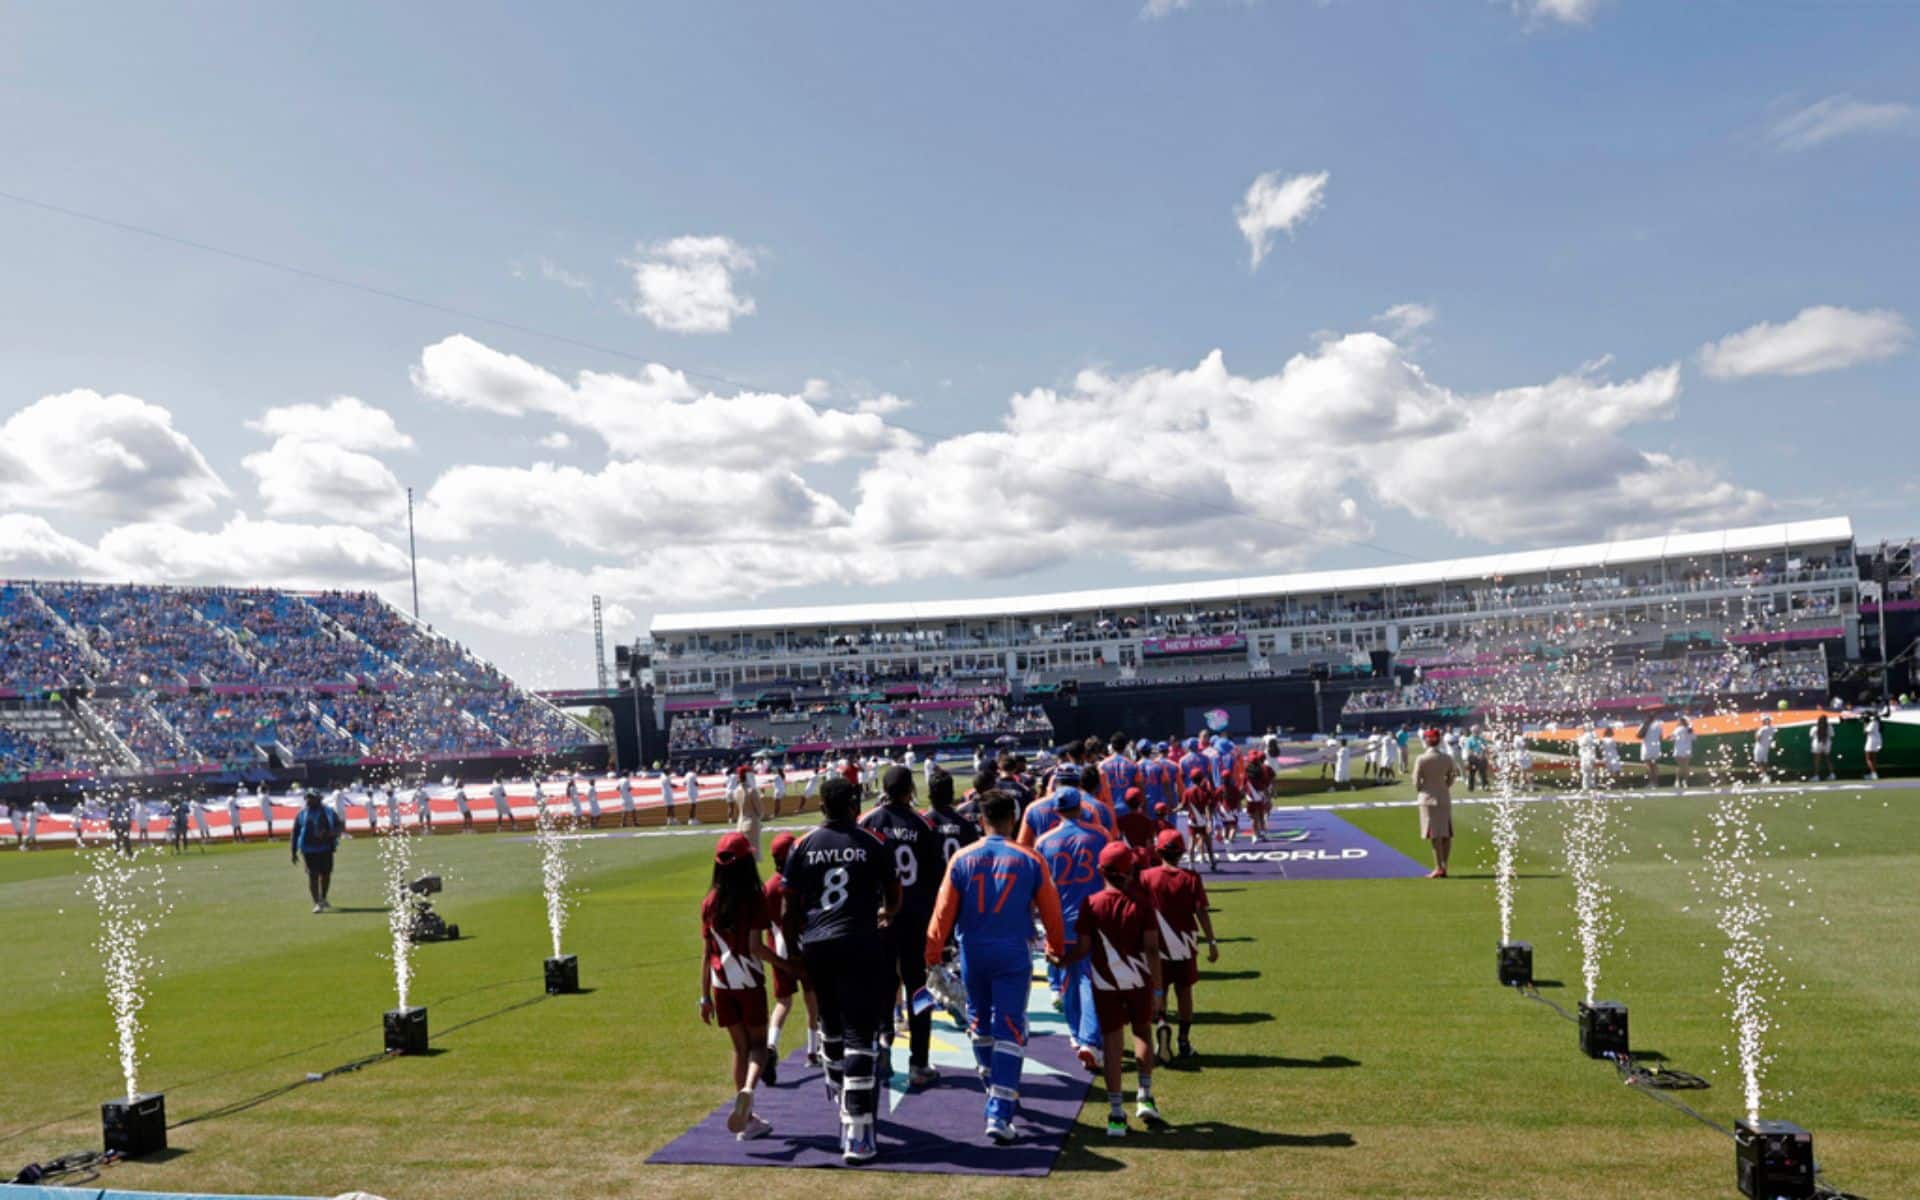 Nassau County Stadium to be dismantled after the T20 World Cup 2024 (AP)